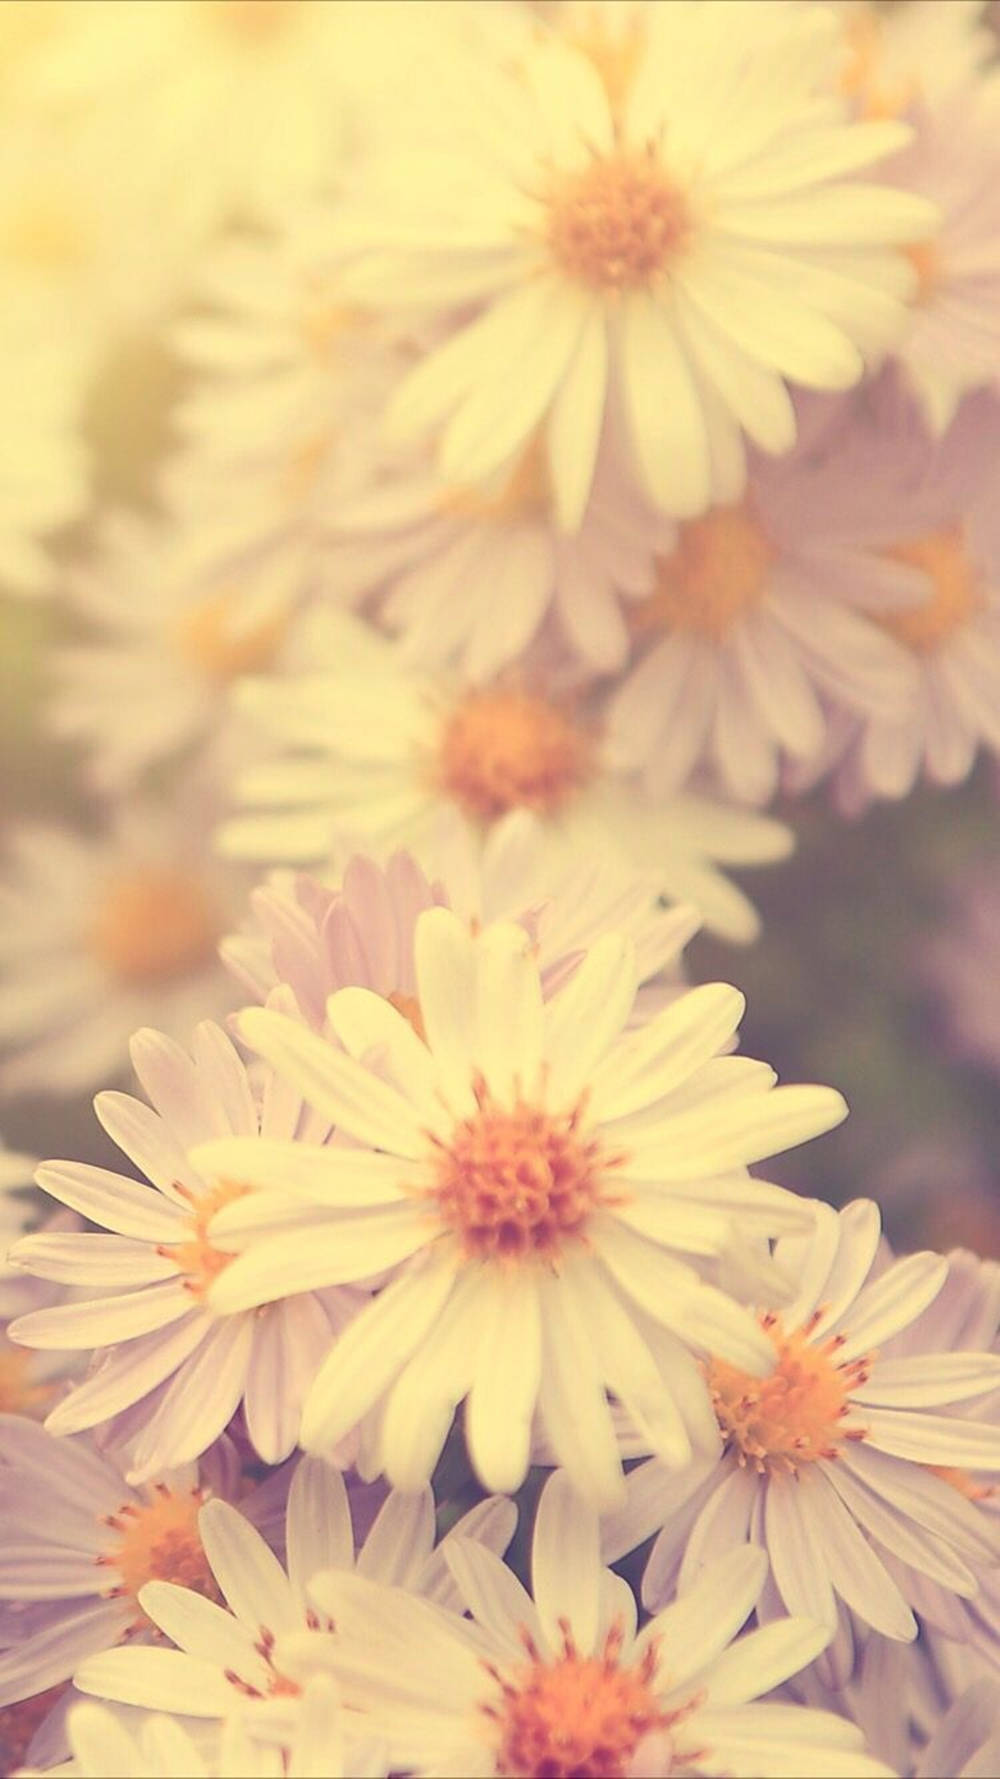 Sepia-toned Daisy Bloom On Phone Screen Background